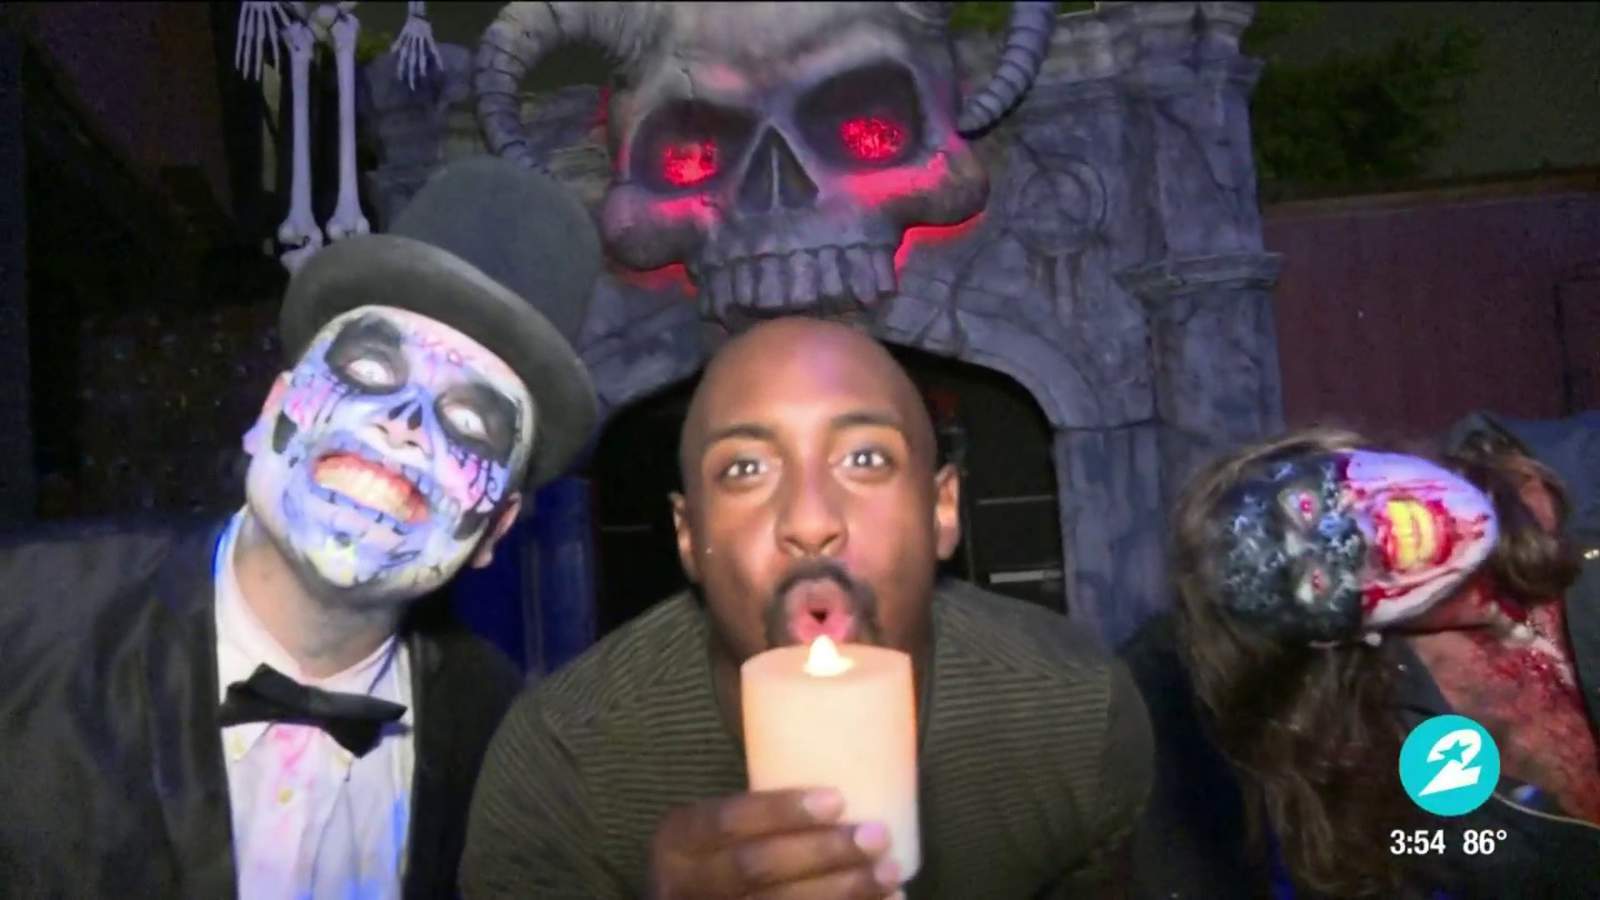 Houston Haunted Houses open for the spooky season with new safety protocols